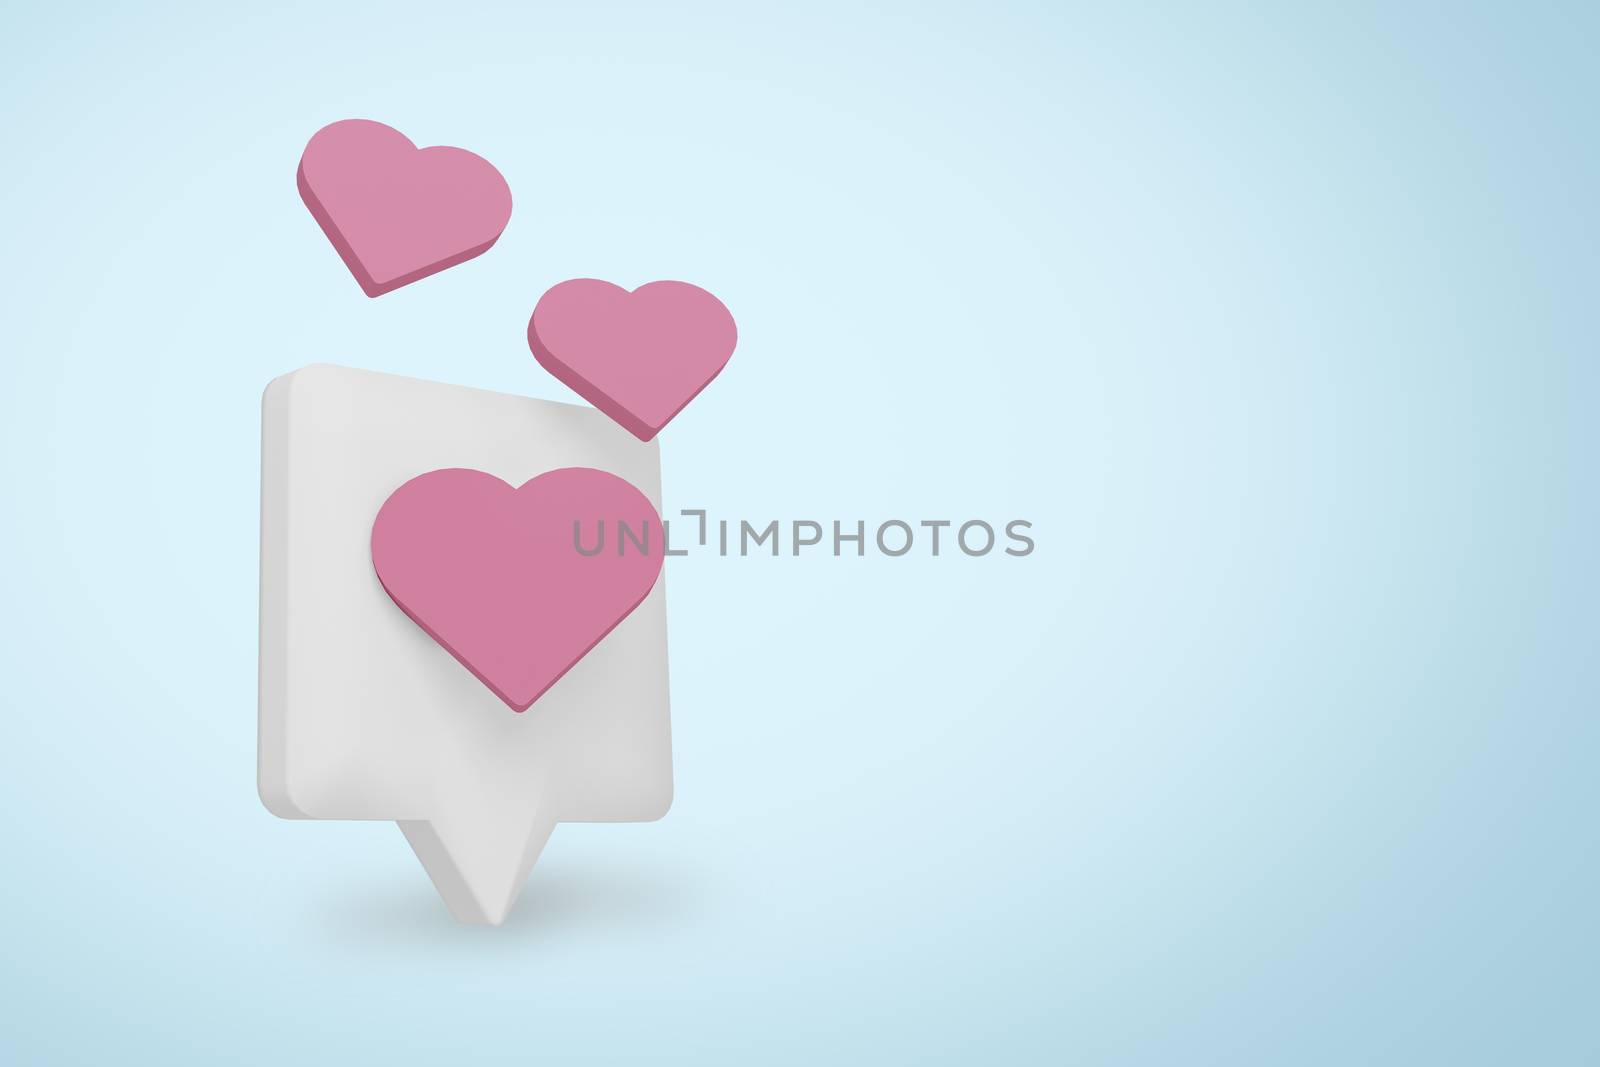 Like and love social media heart shape notification icon,  3d rendering.